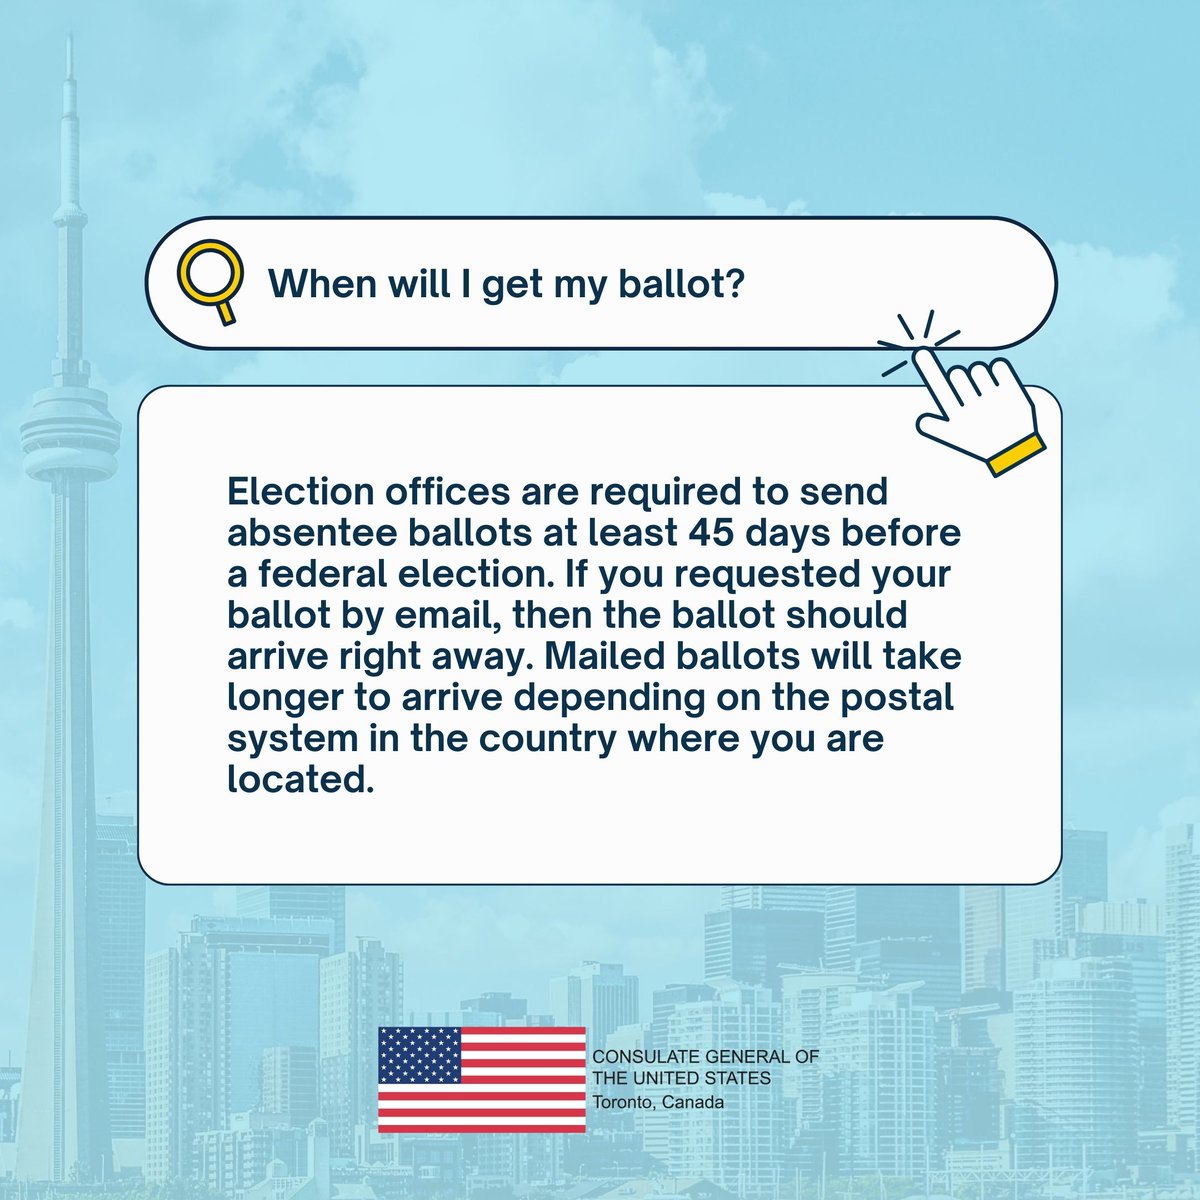 📌 States have different steps and deadlines regarding how and when voting forms are returned. Head to @FVAP for specific information for your home state: fvap.gov/guide